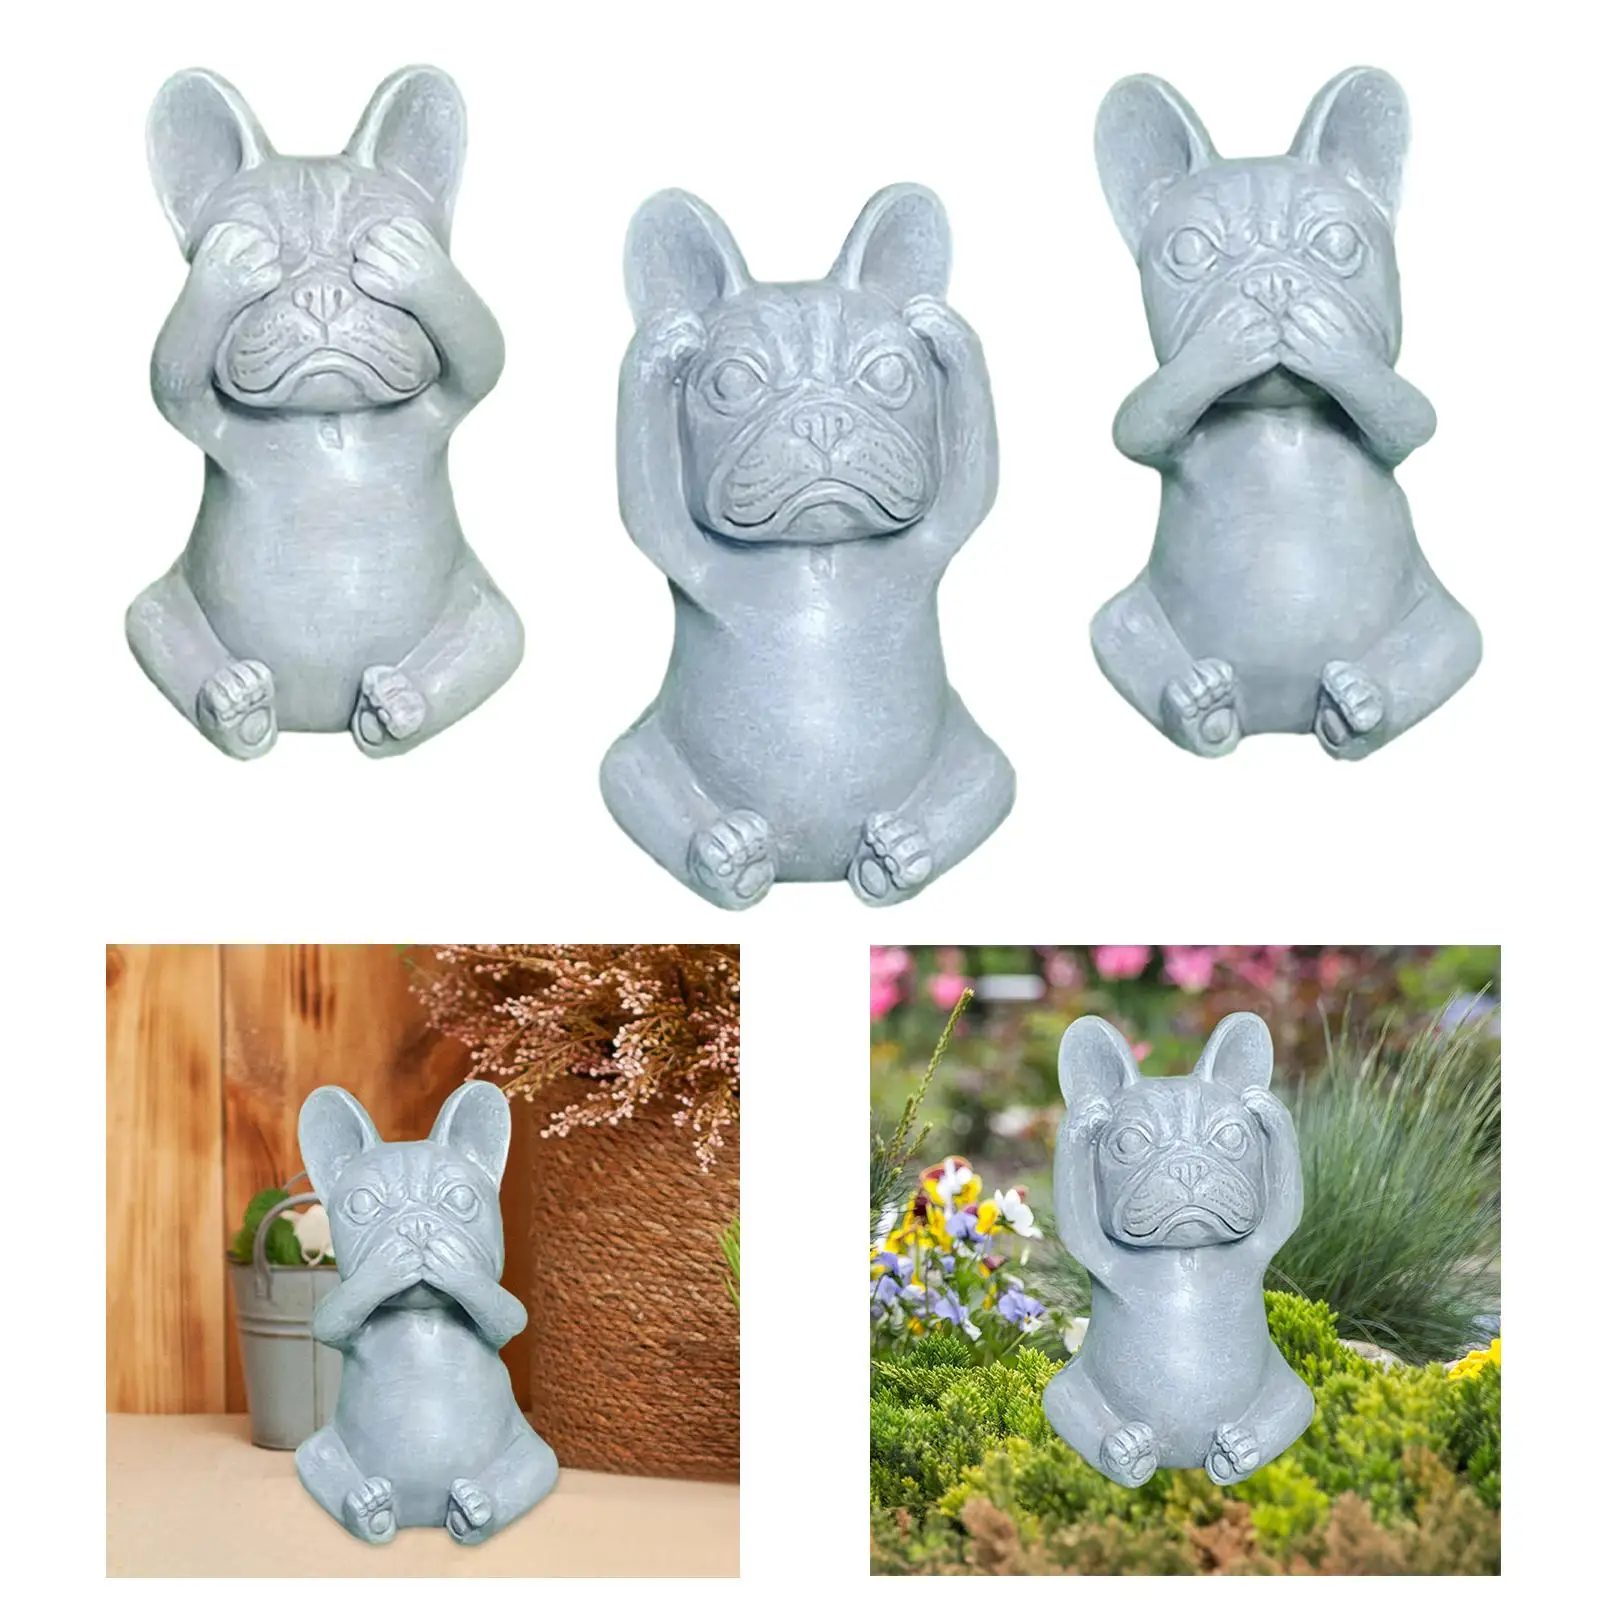 French Bulldog Statue Cute Artwork Resin Crafts Matte Dark Grey Ornaments for Yard Lawn Indoor Outdoor Courtyard Home Decor